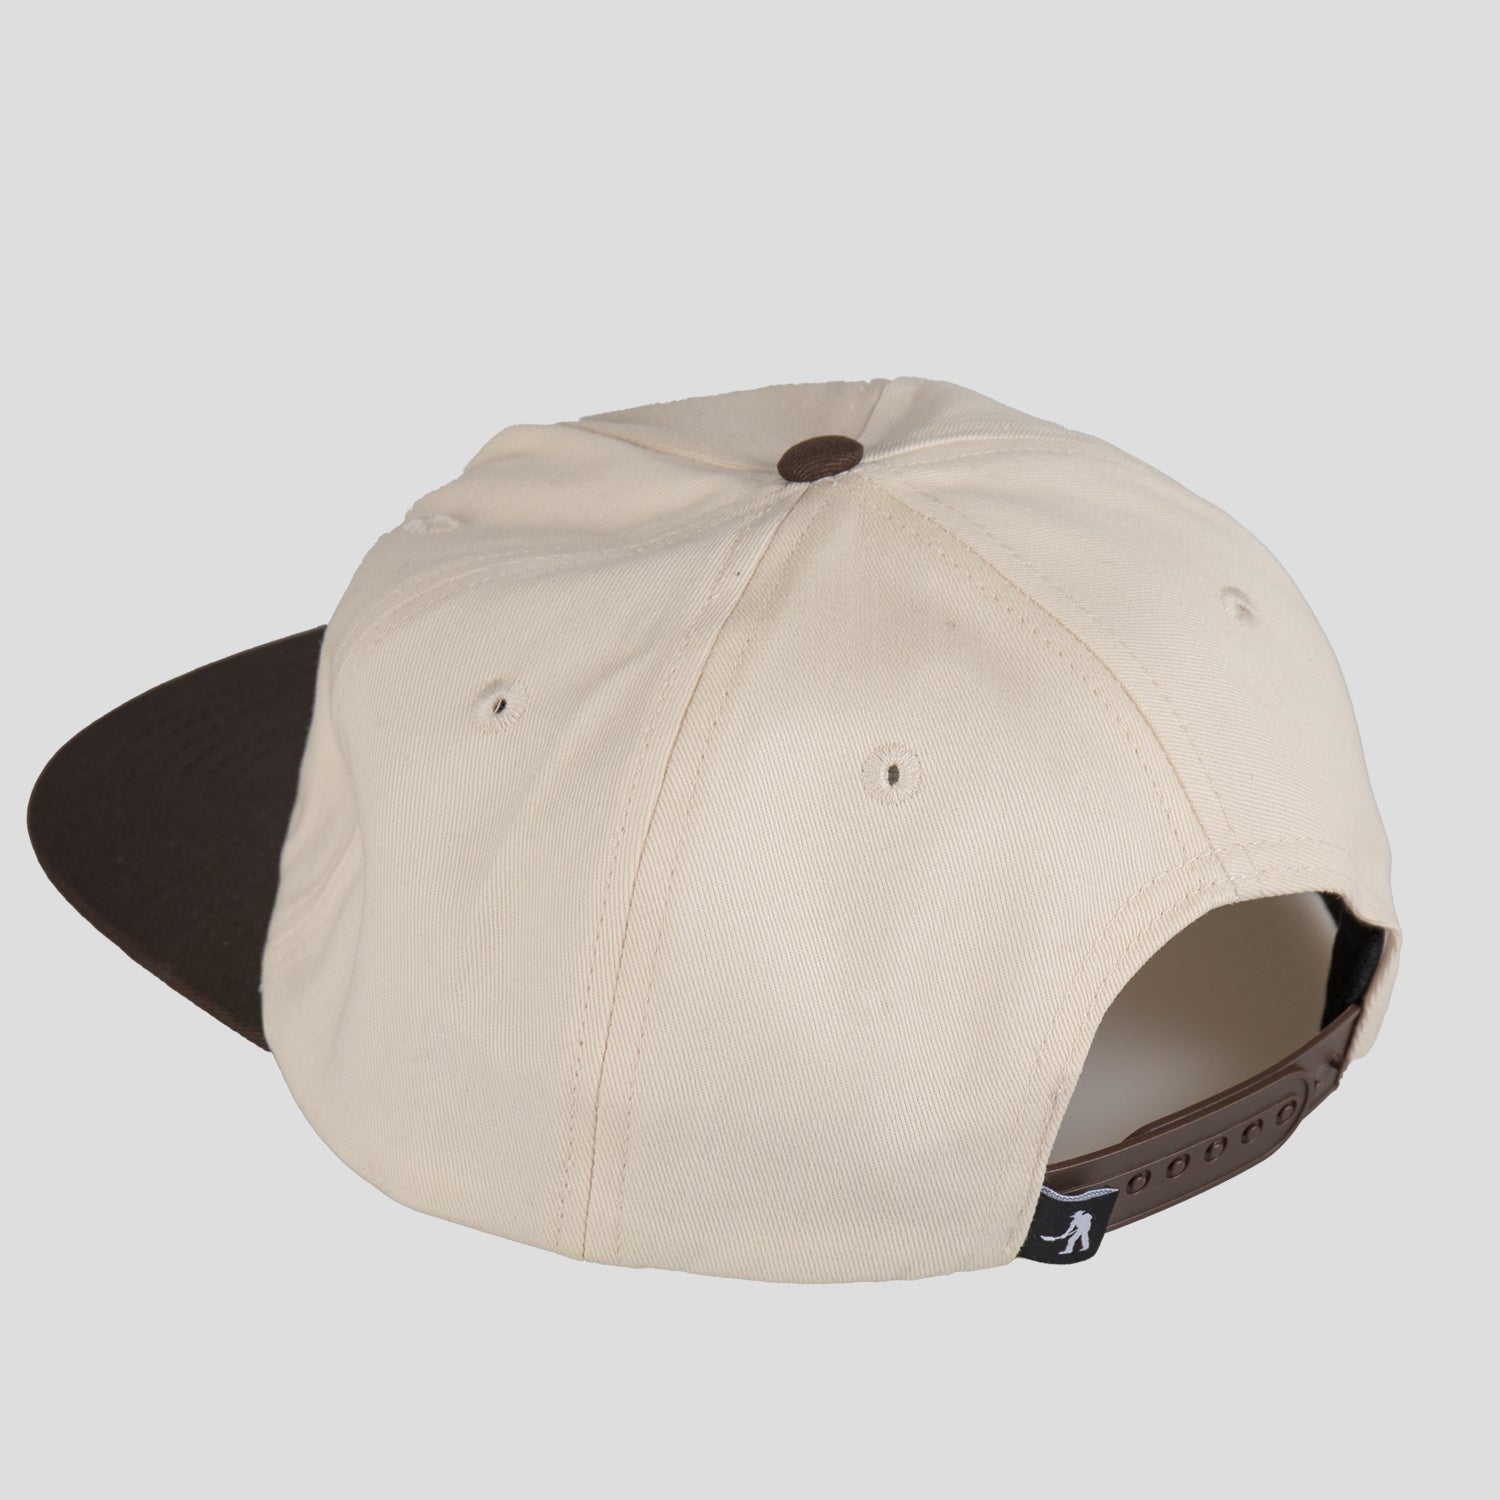 Pass~Port Crying Cow 5 Panel Cap - Off White / Choc